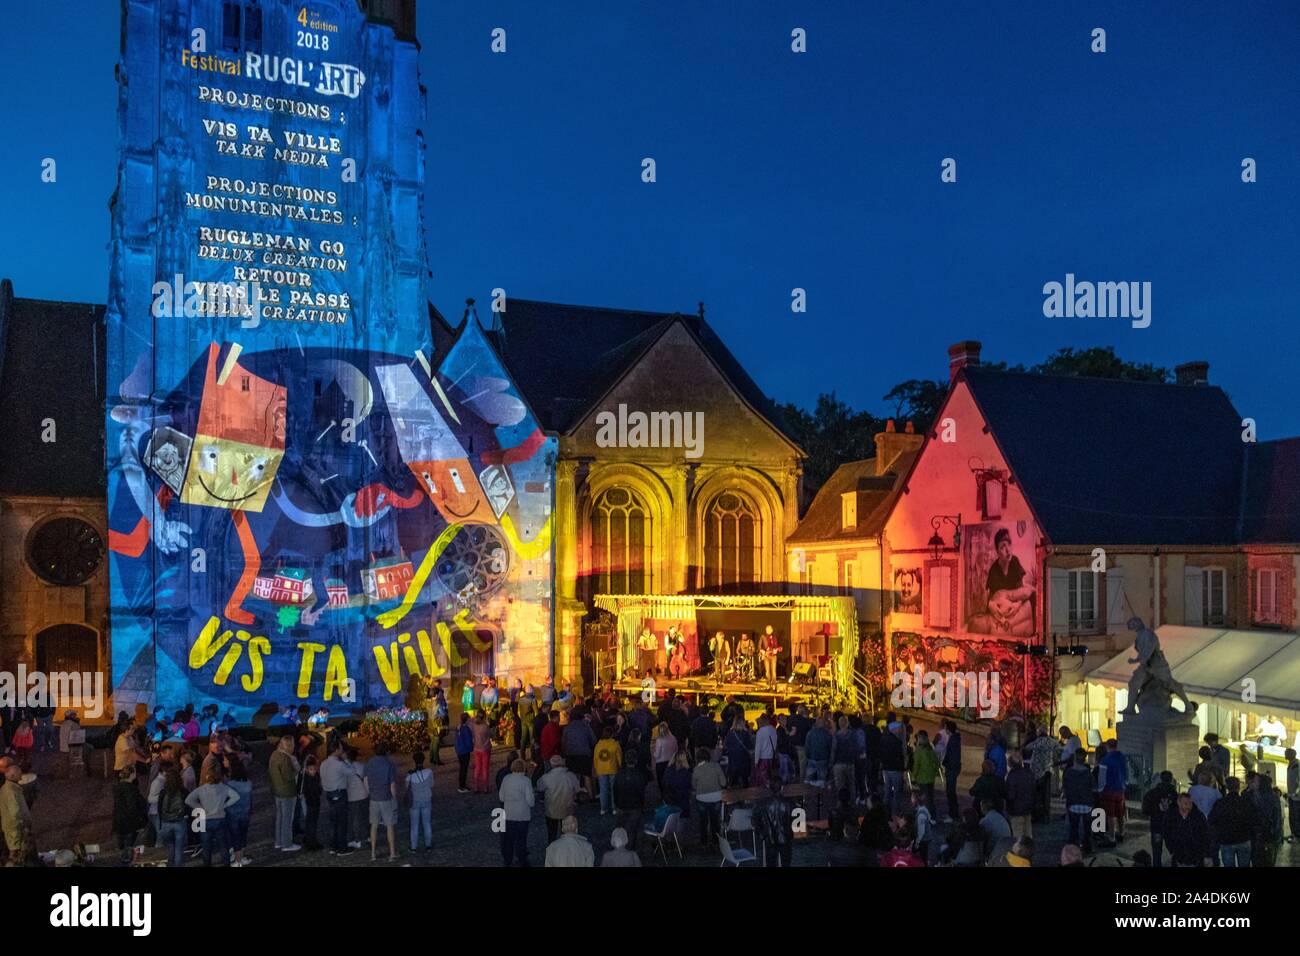 RUGL'ART CULTURAL FESTIVAL, CONCERTS, GIANT PHOTOS AND MAPPING, TOWN OF RUGLES, EURE, NORMANDY, FRANCE Stock Photo